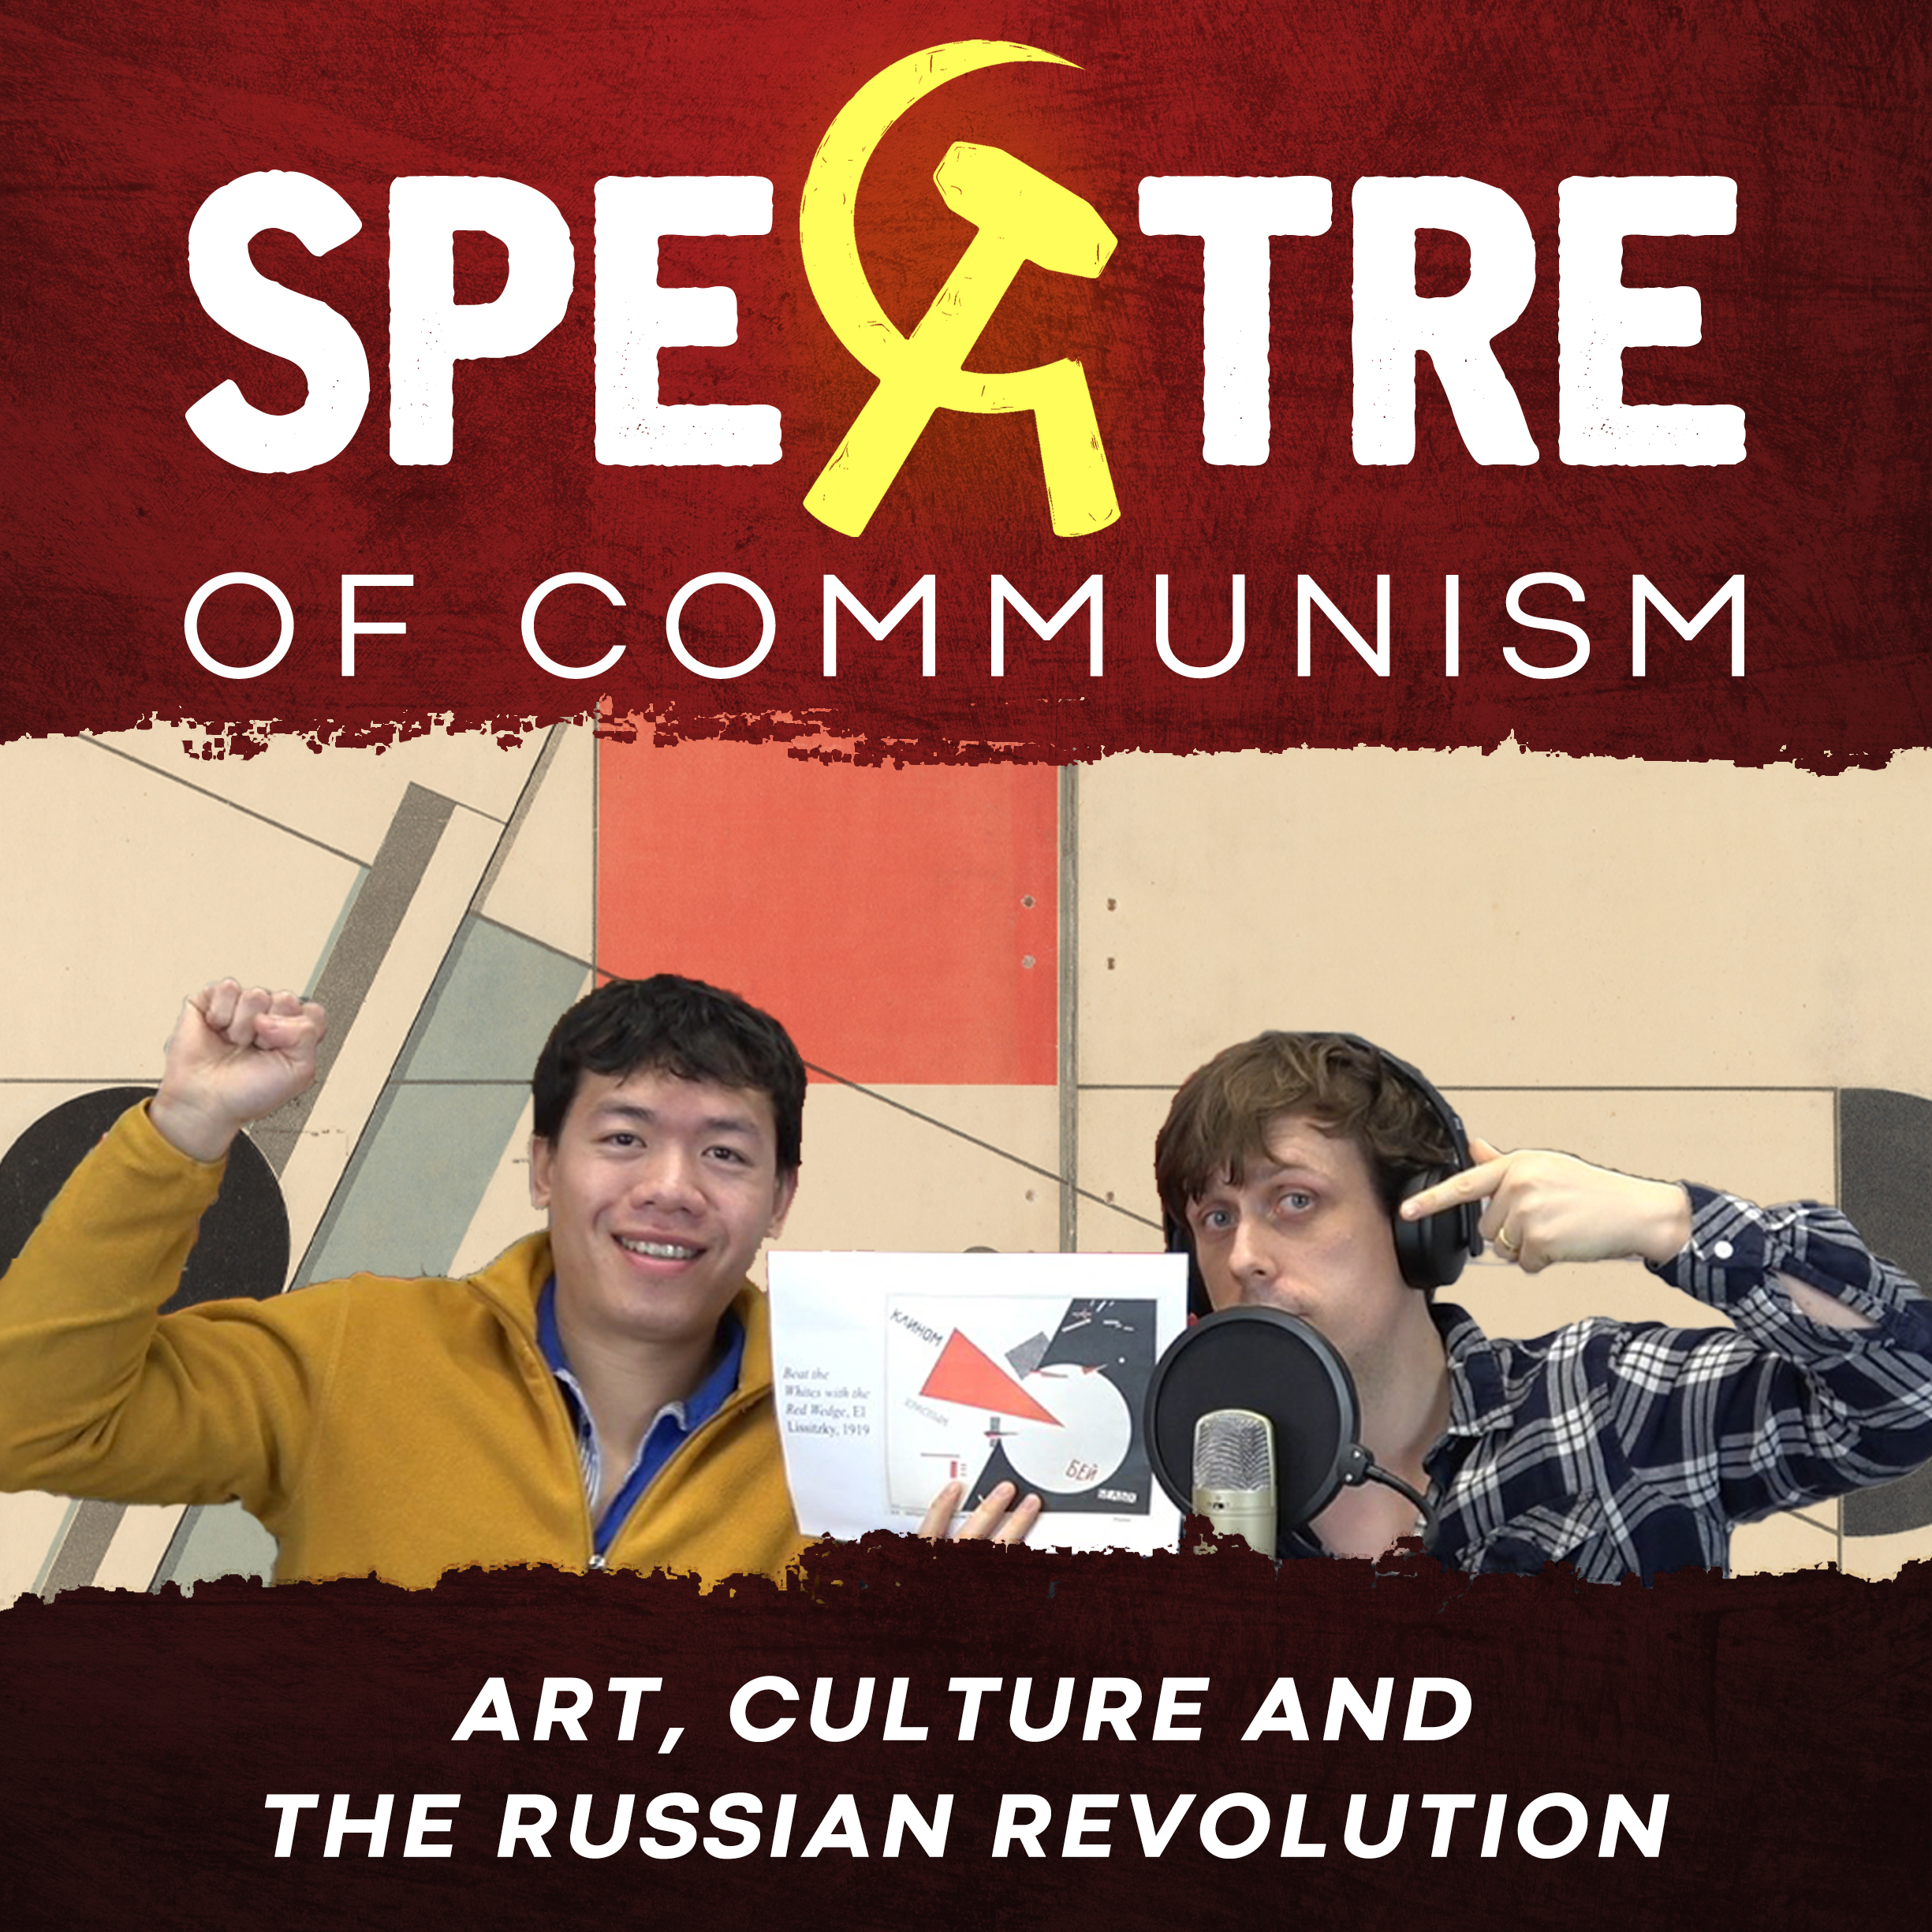 Art, culture and the Russian Revolution